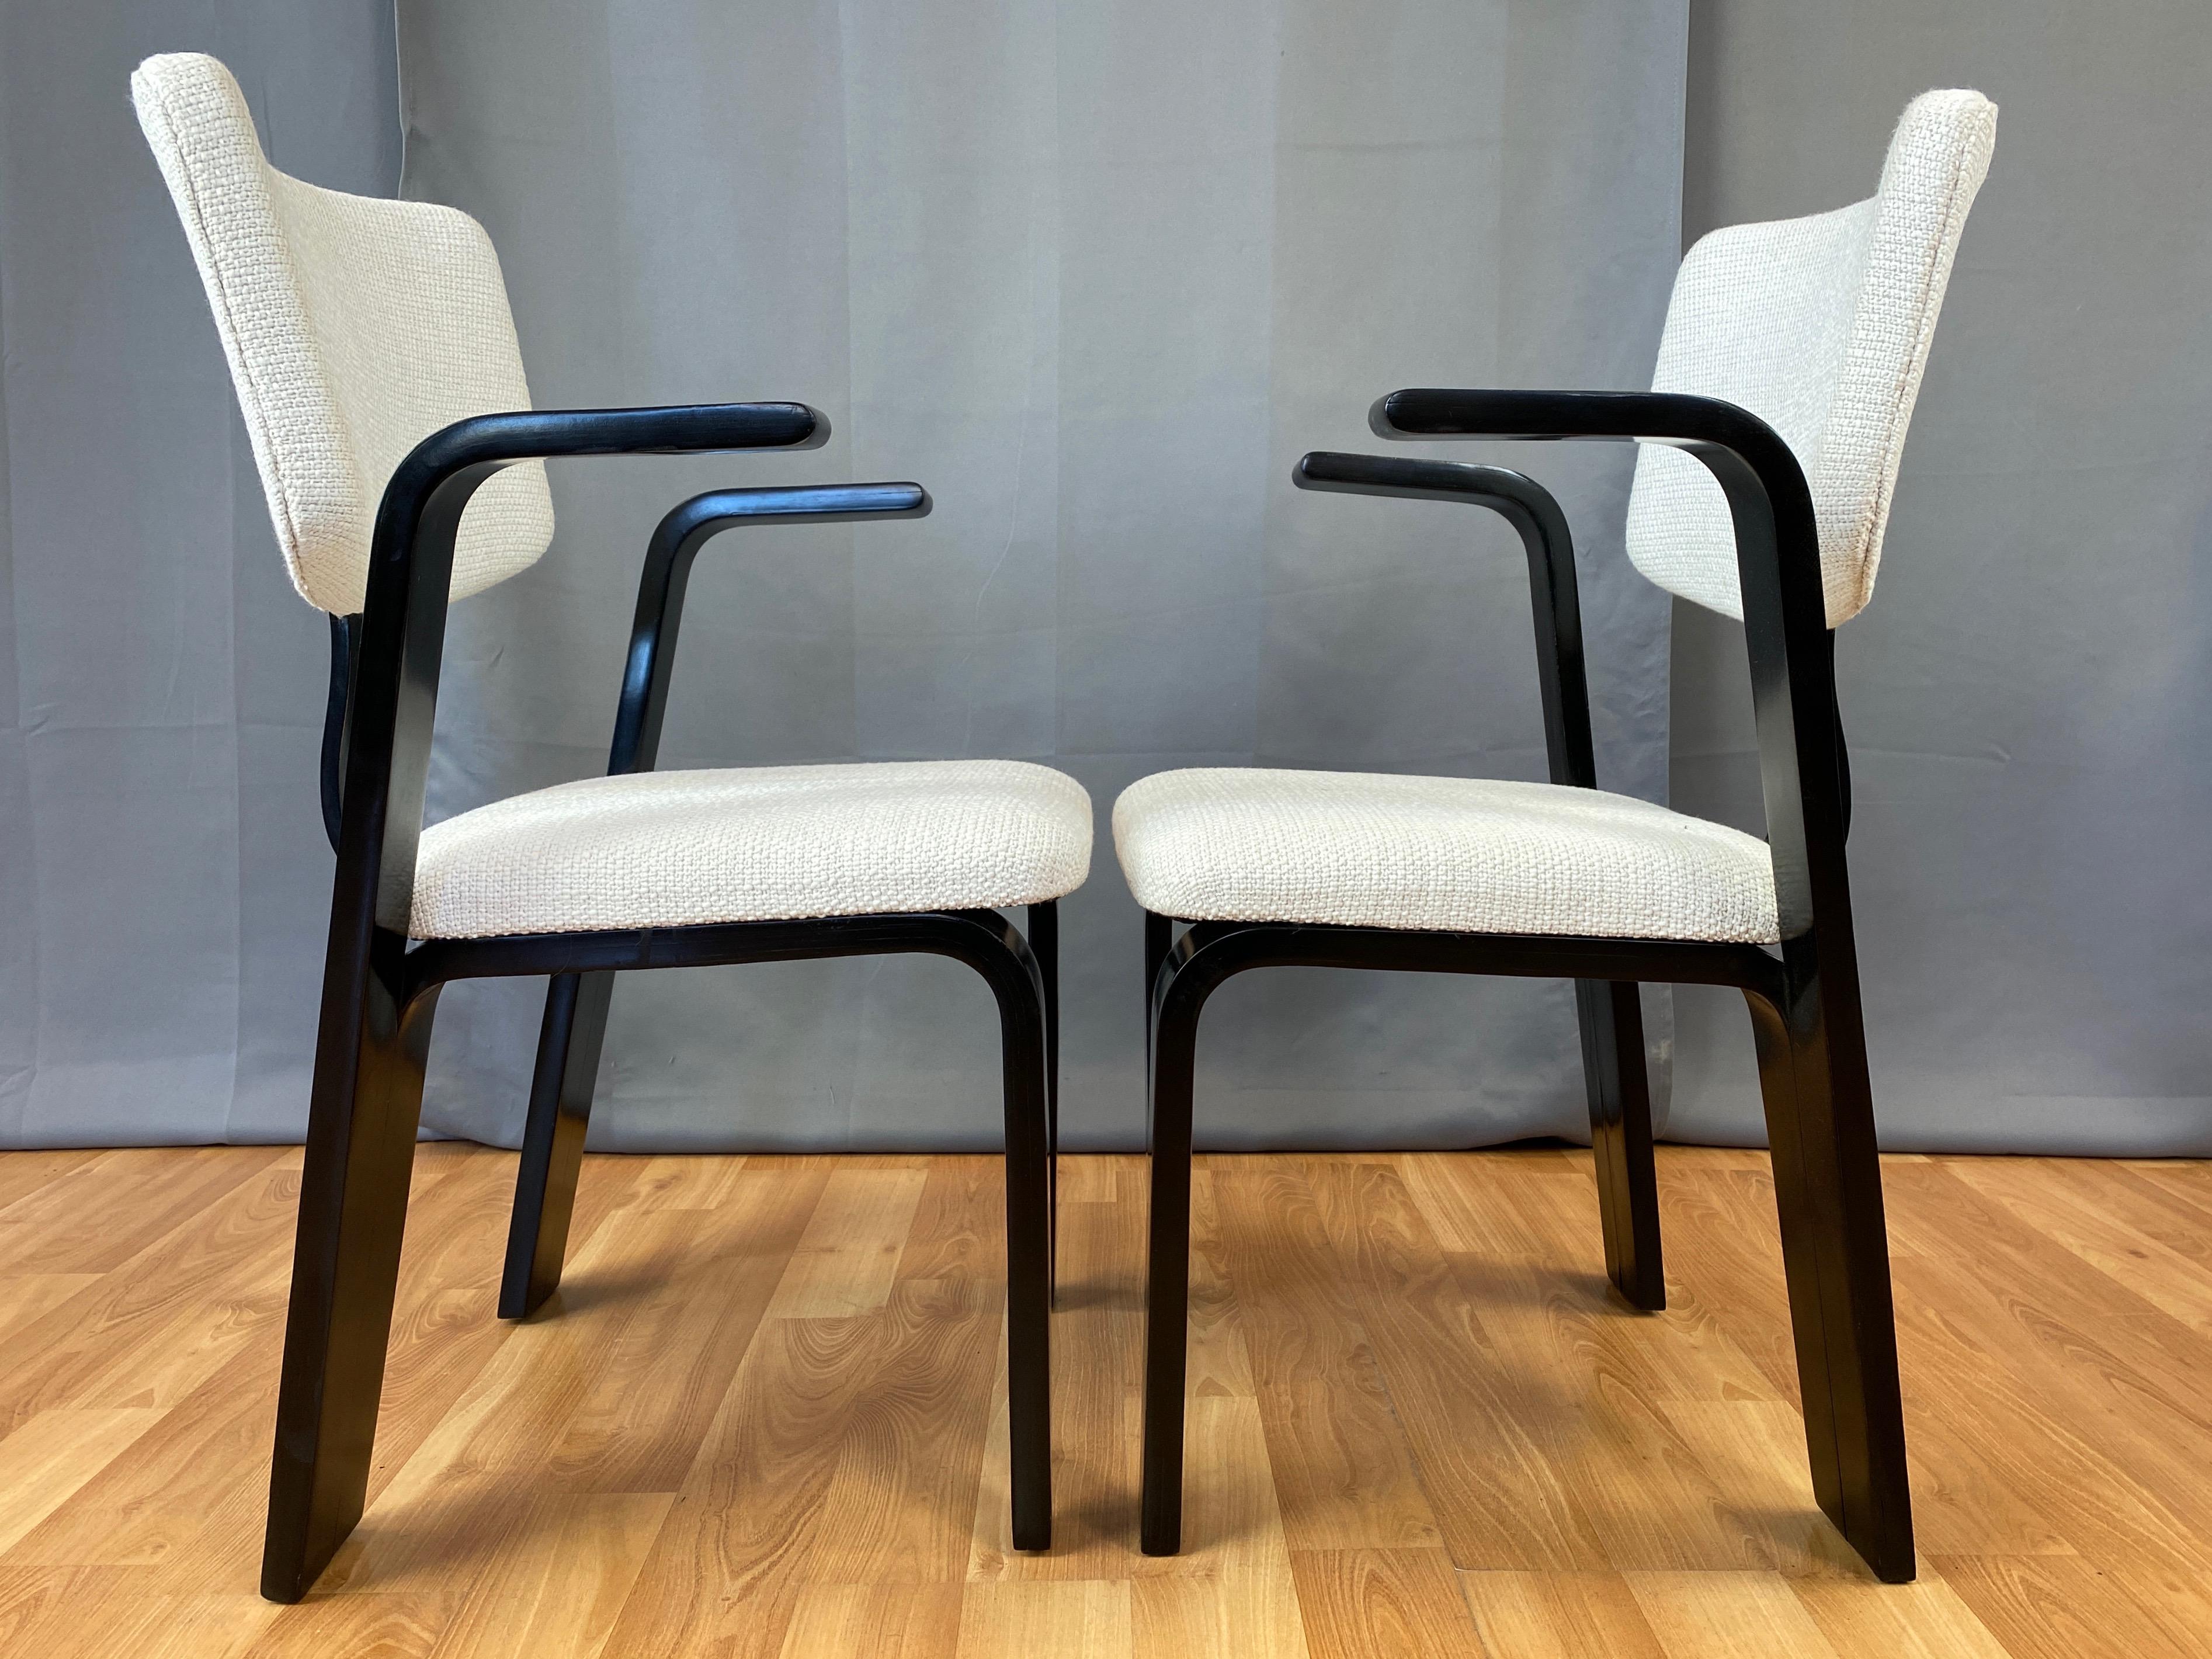 Upholstery Pair of Thonet Black Lacquered Bentwood Armchairs with Upholstered Seats, 1940s For Sale